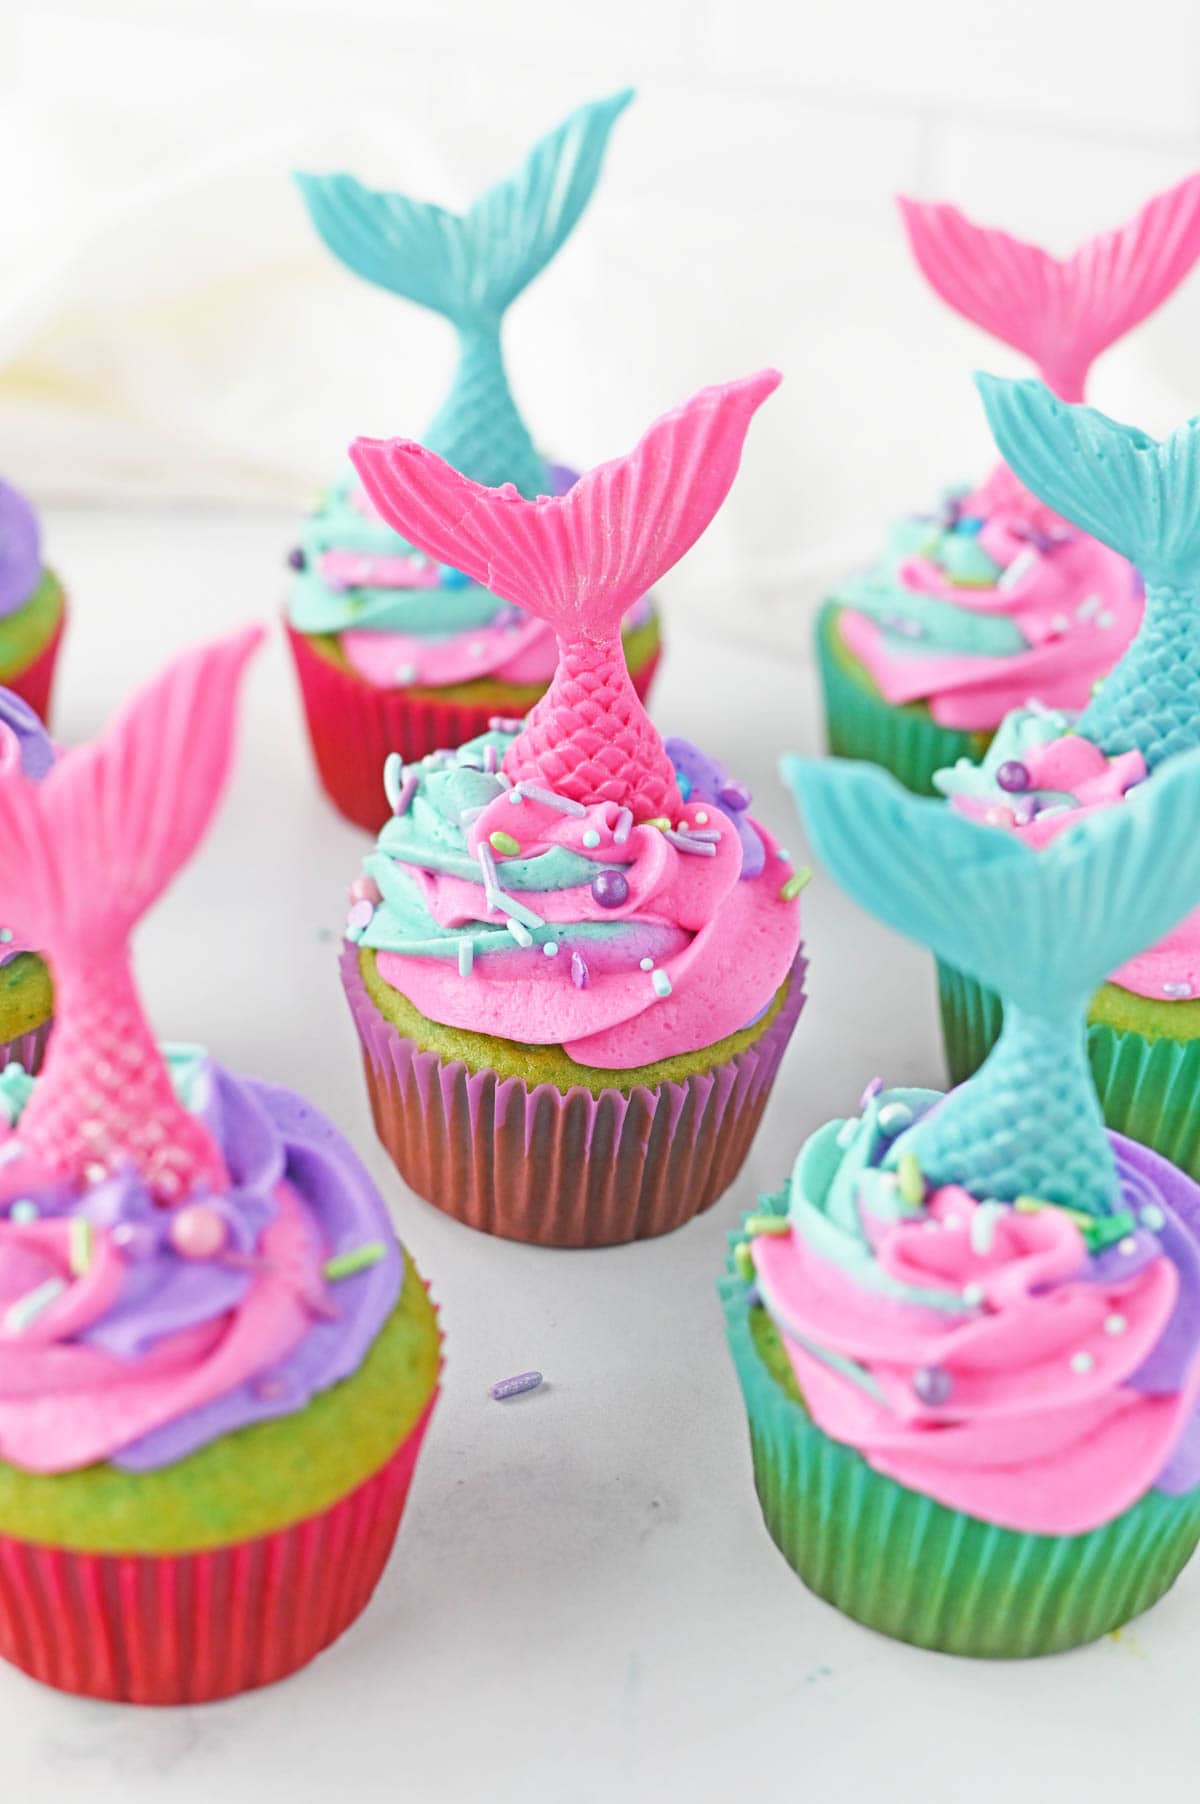 Mermaid cupcakes with pink and blue mermaid tails sticking out of the frosting